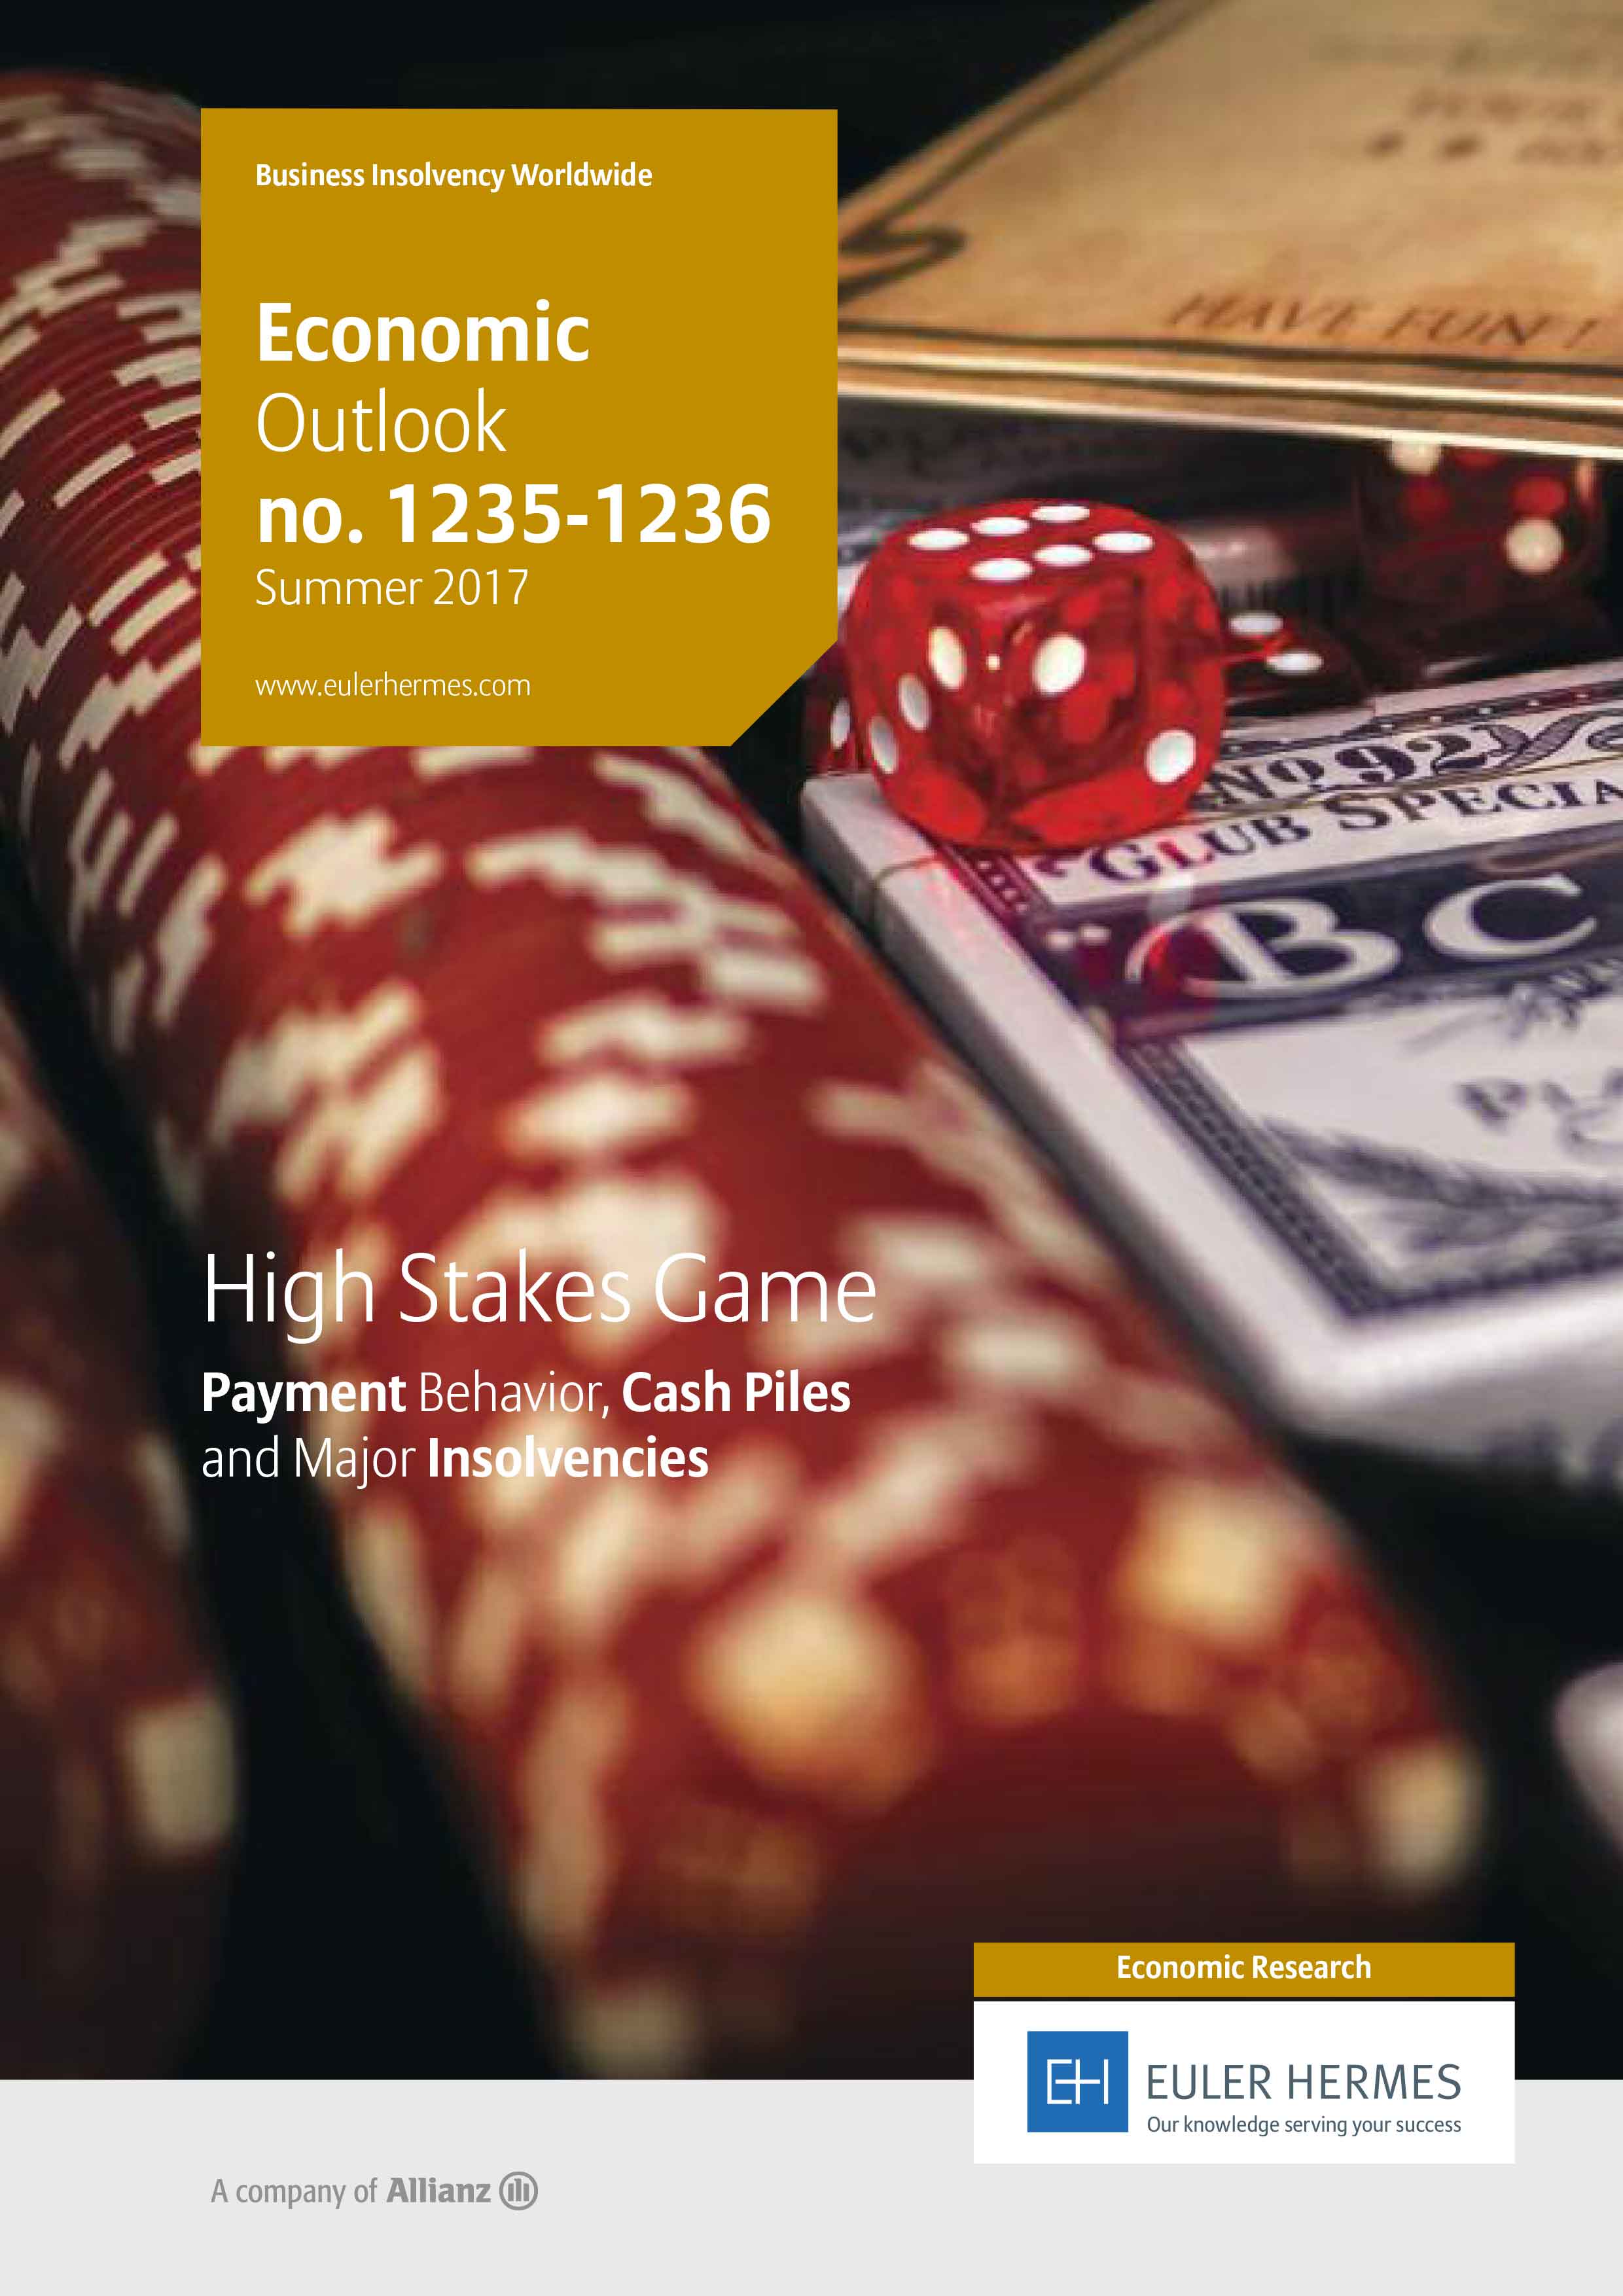 High Stakes Game - Payment Behavior, Cash Piles and Major Insolvencies